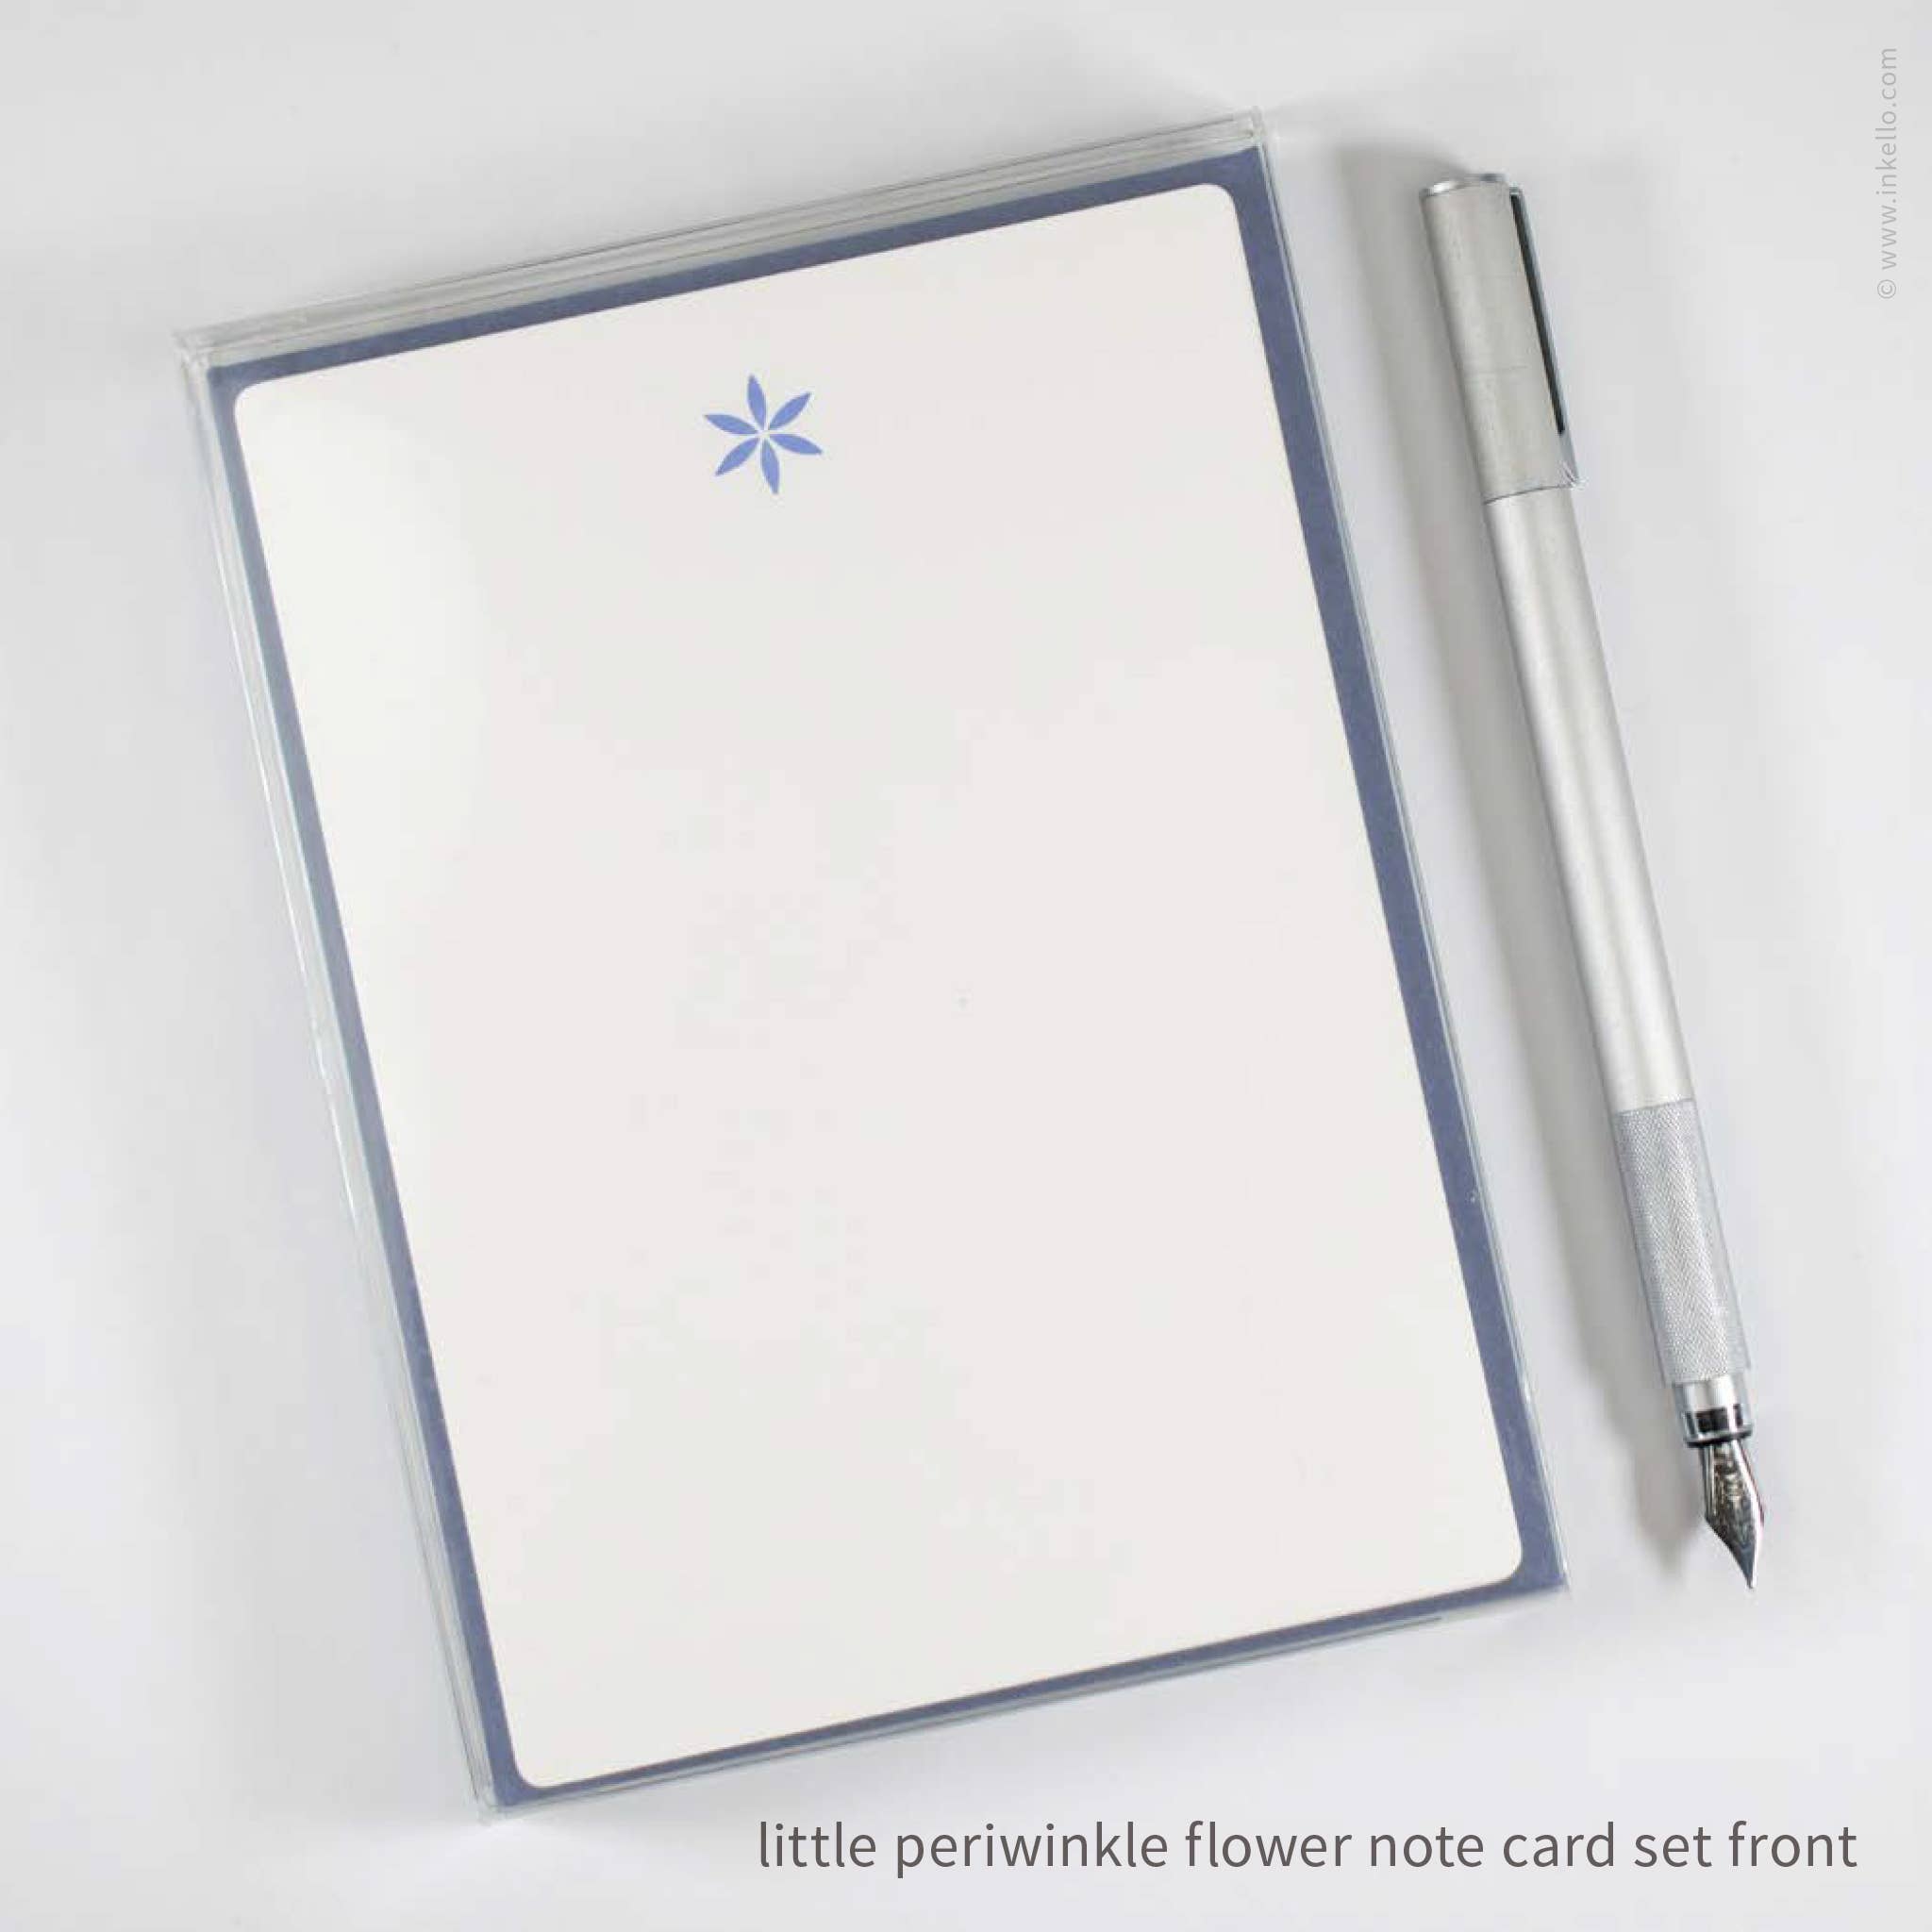 Flat Note Card Set with Little Periwinkle Flower